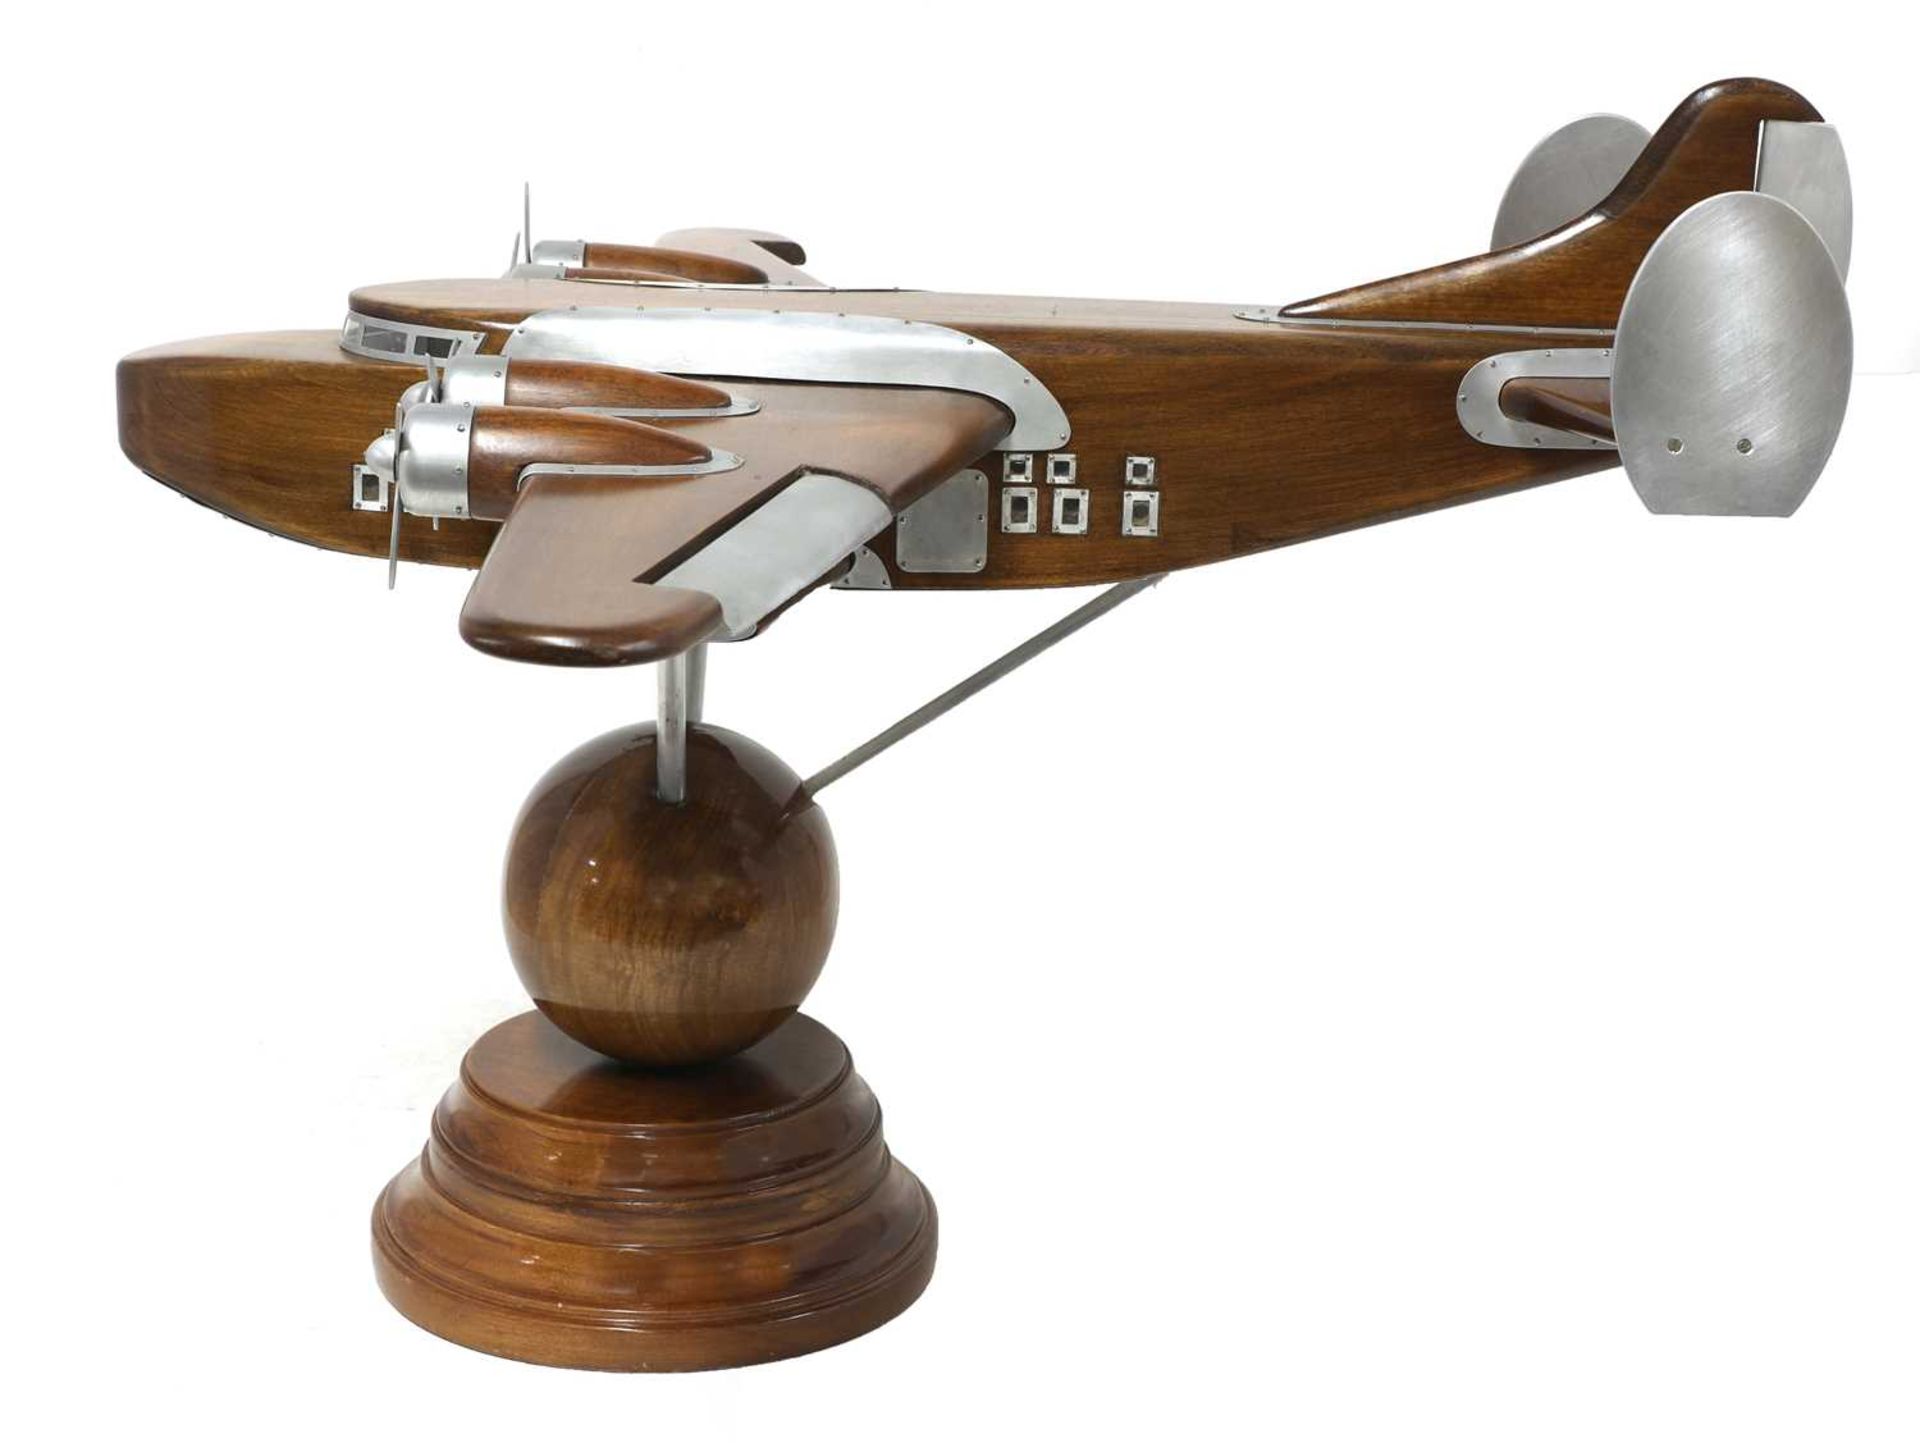 A model of a Pan American Boeing 314 Clipper floatplane, - Image 3 of 5